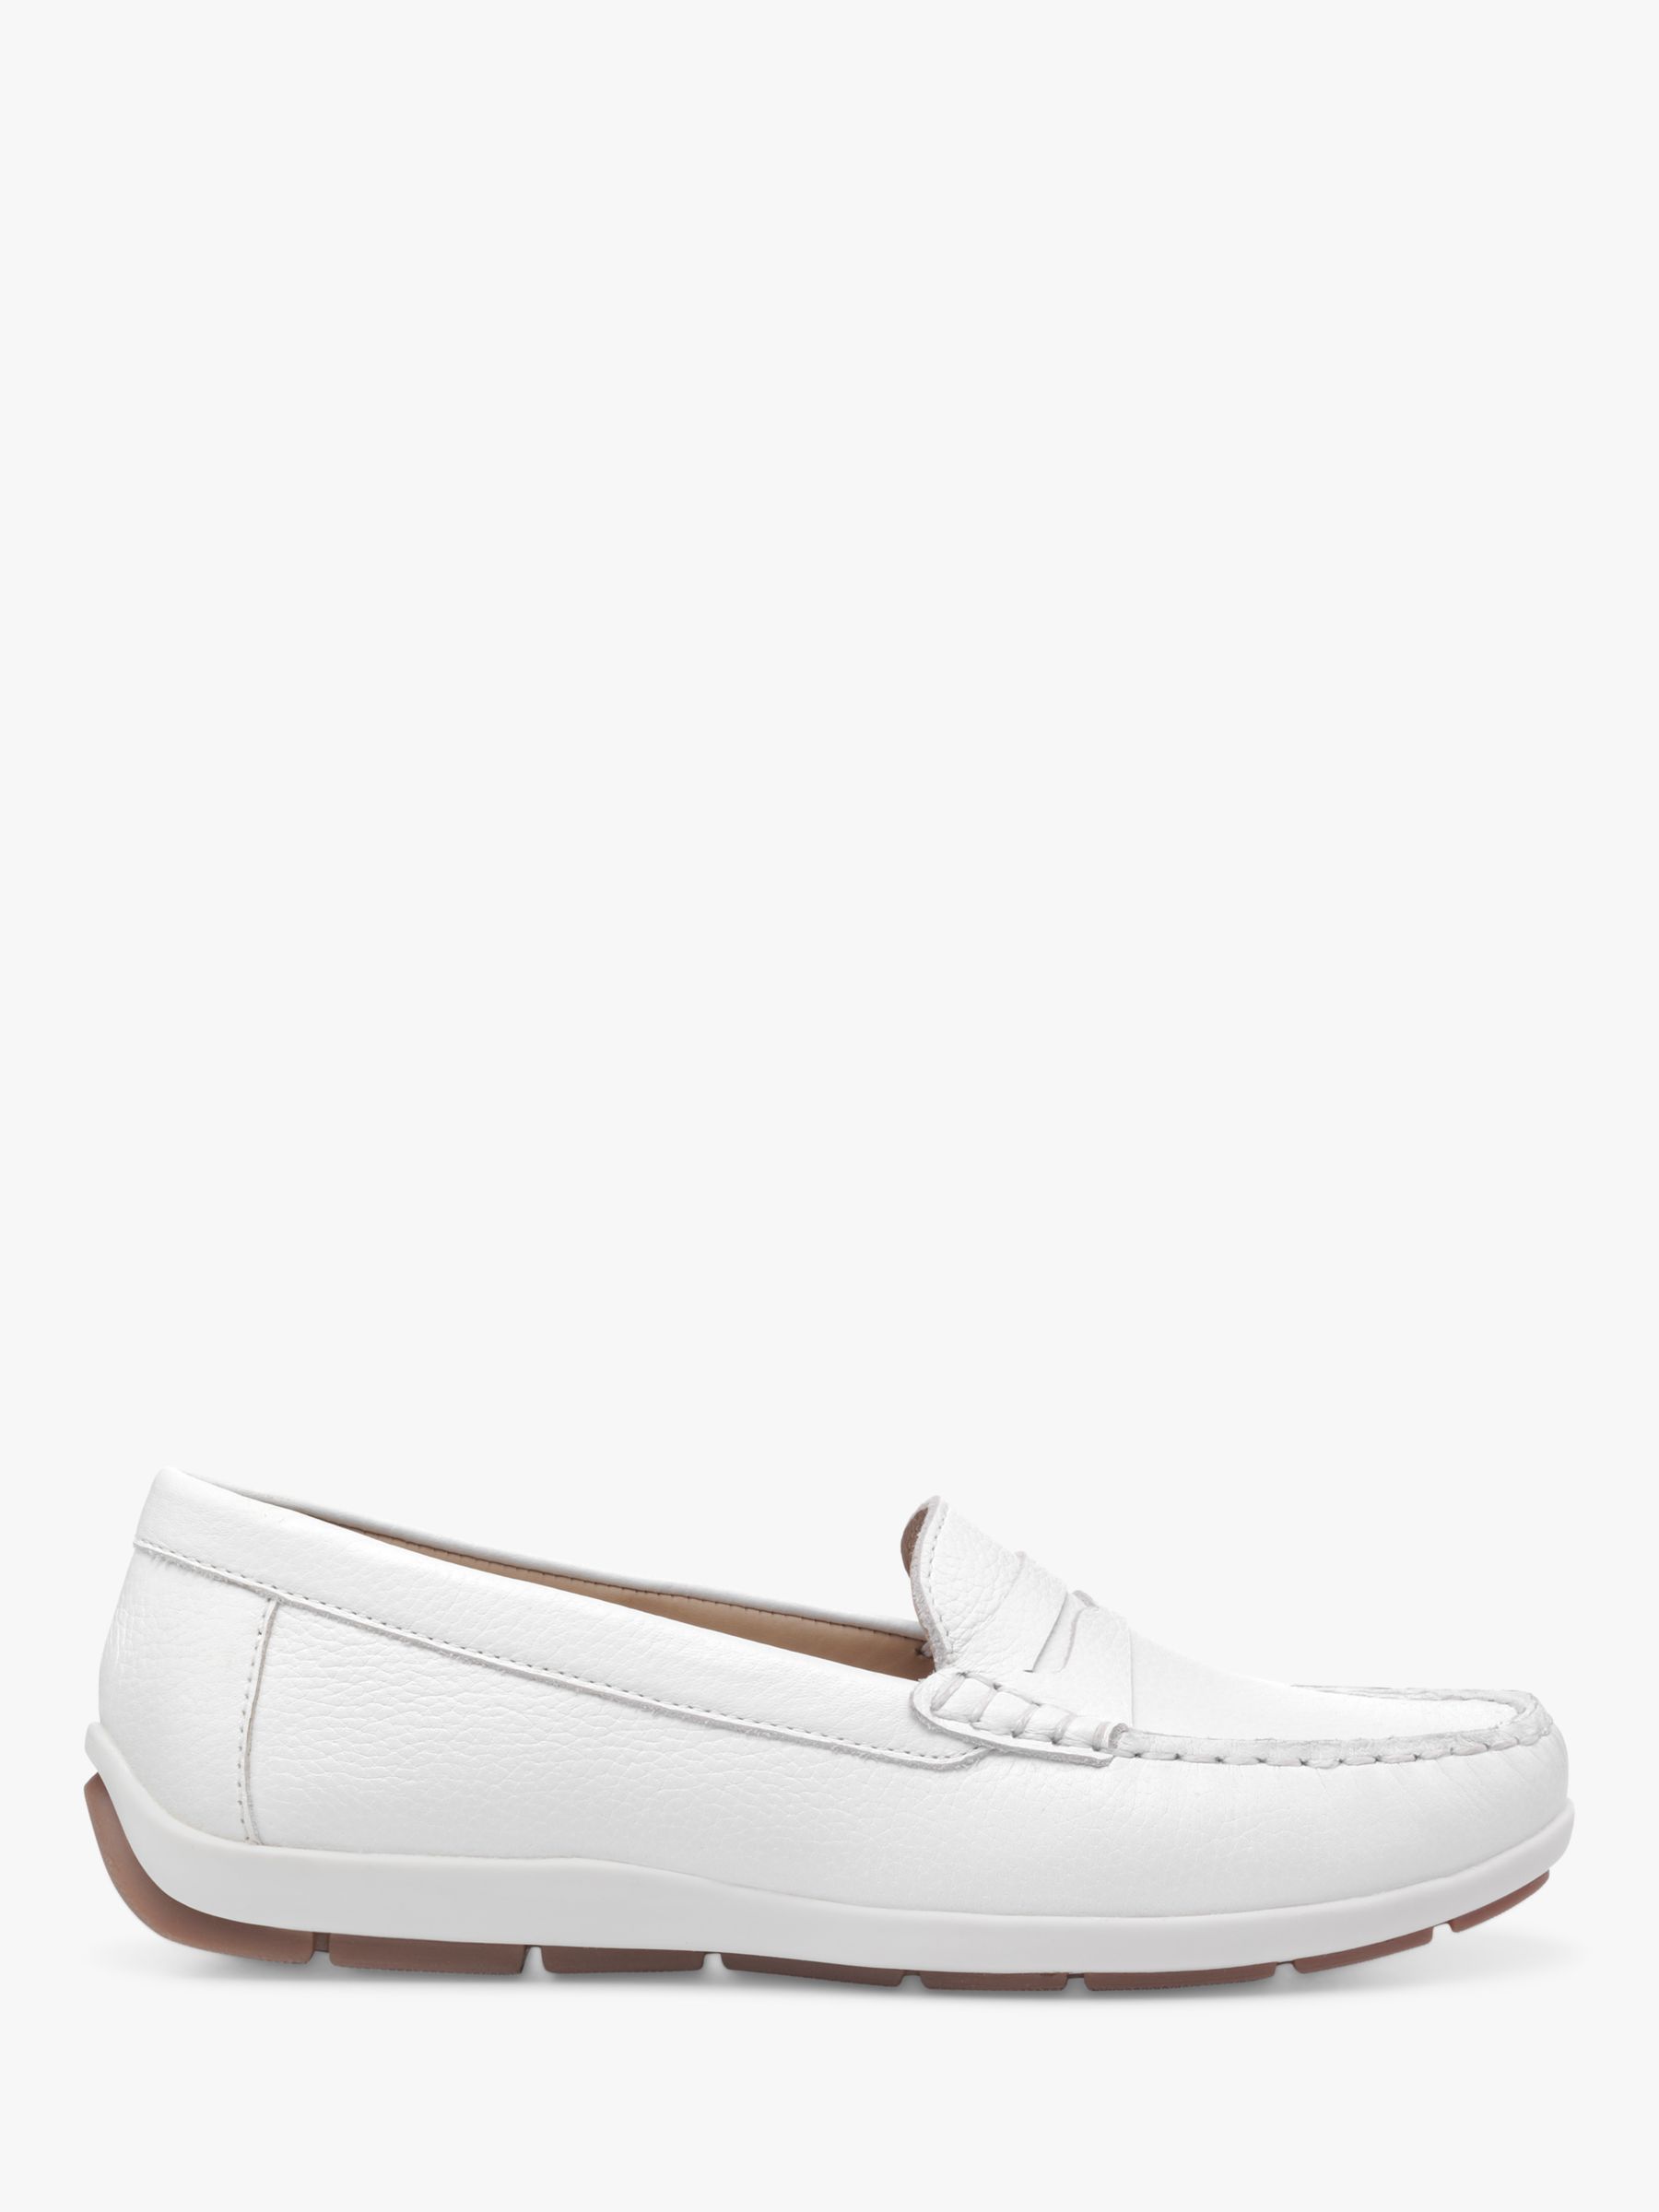 Hotter Pier Loafers, White at John Lewis & Partners